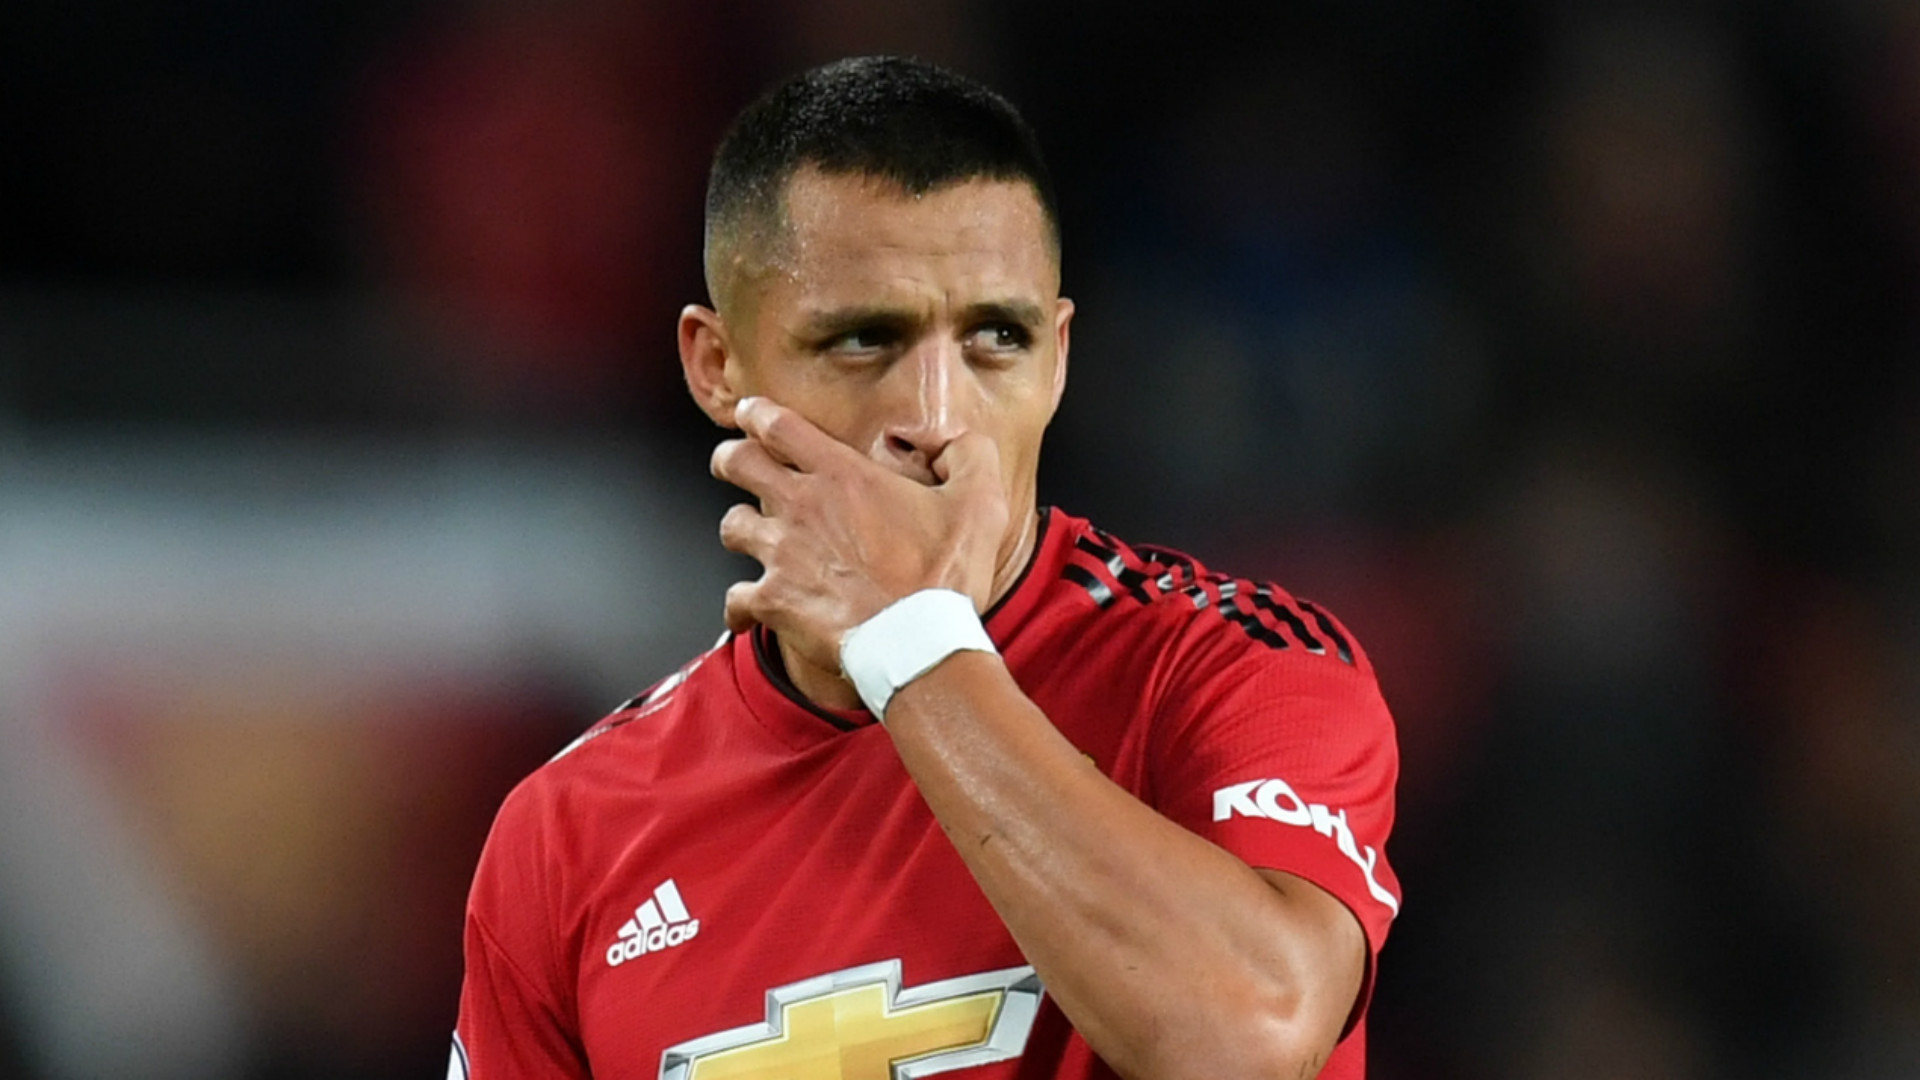 'Maybe he saw a ghost!' - Ex-Man Utd winger Sanchez mocked by Rafael as he claims he 'played so bad every time'